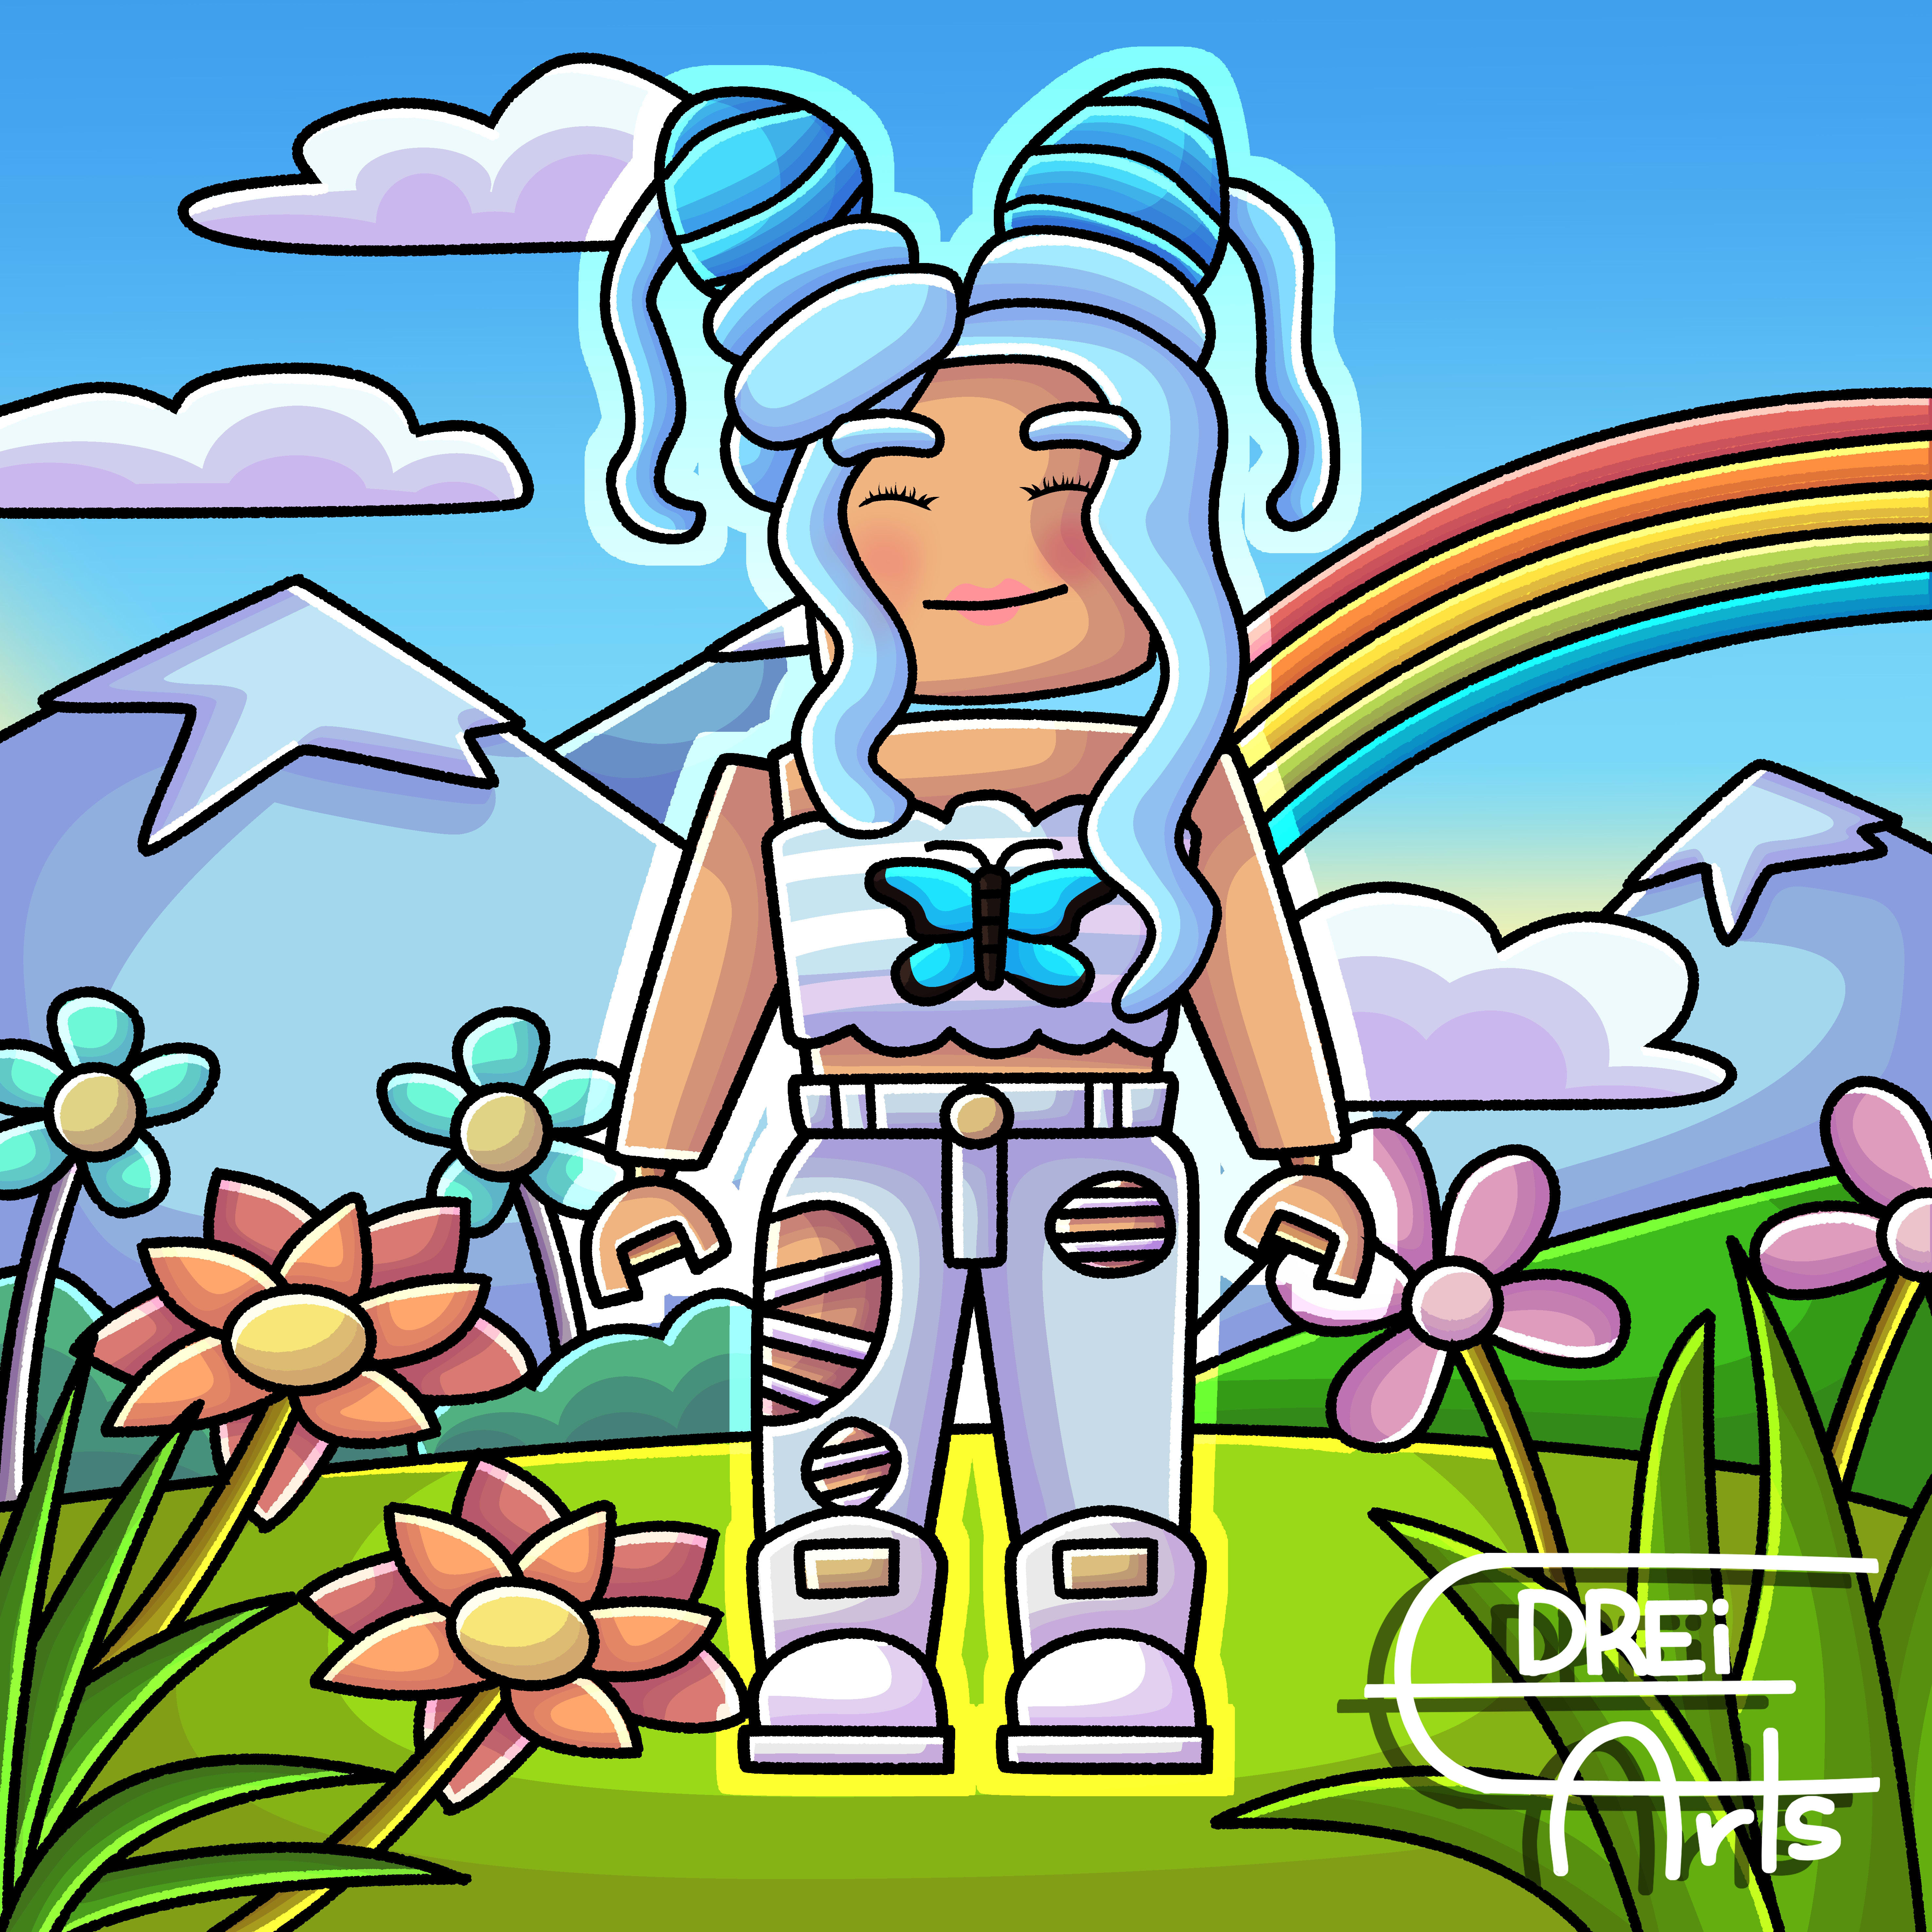 Draw Your Roblox Skin In Cartoon Style By Edreiarts - calixo roblox skin